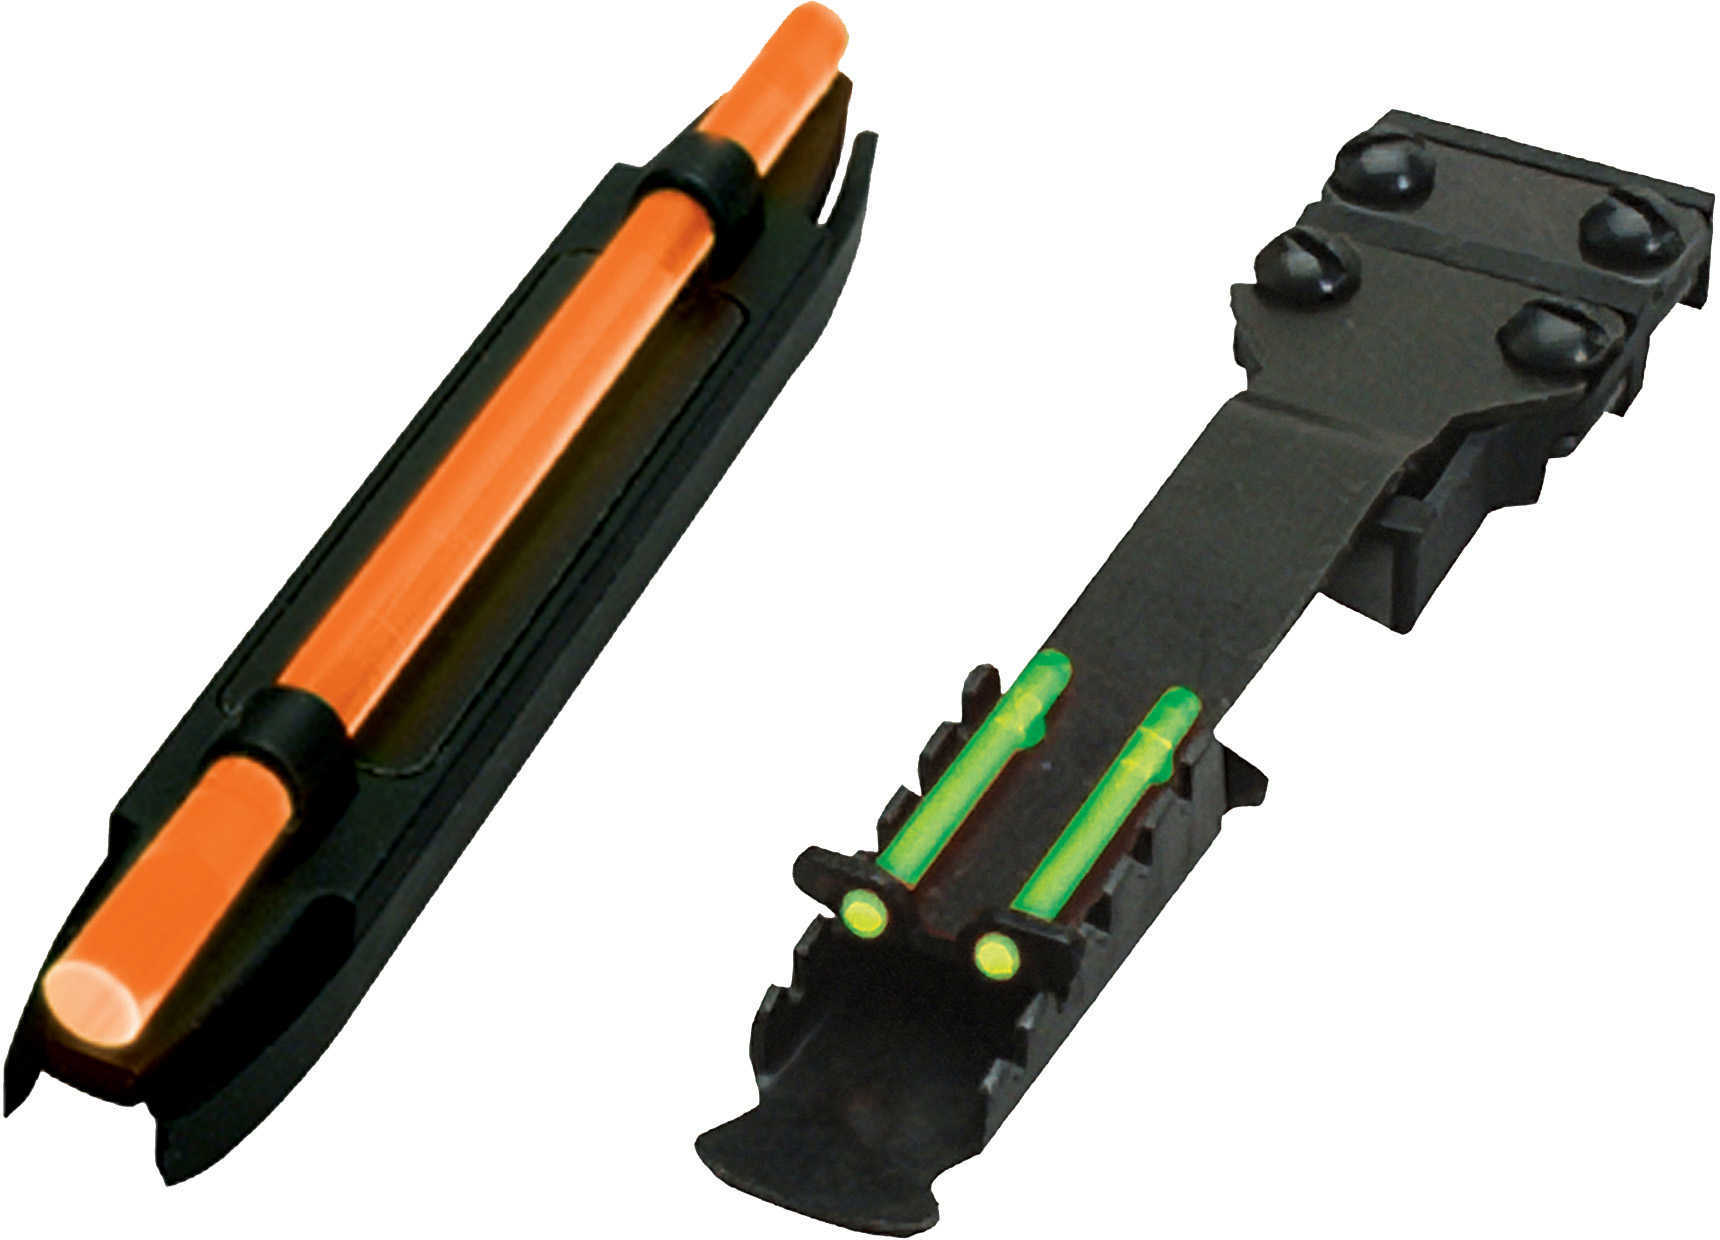 Hi-Viz Narrow Magnetic Shotgun Front and Rear Sight Combo Pack. Fits shotguns with ribs from .218" to .328" (7/32" to 21